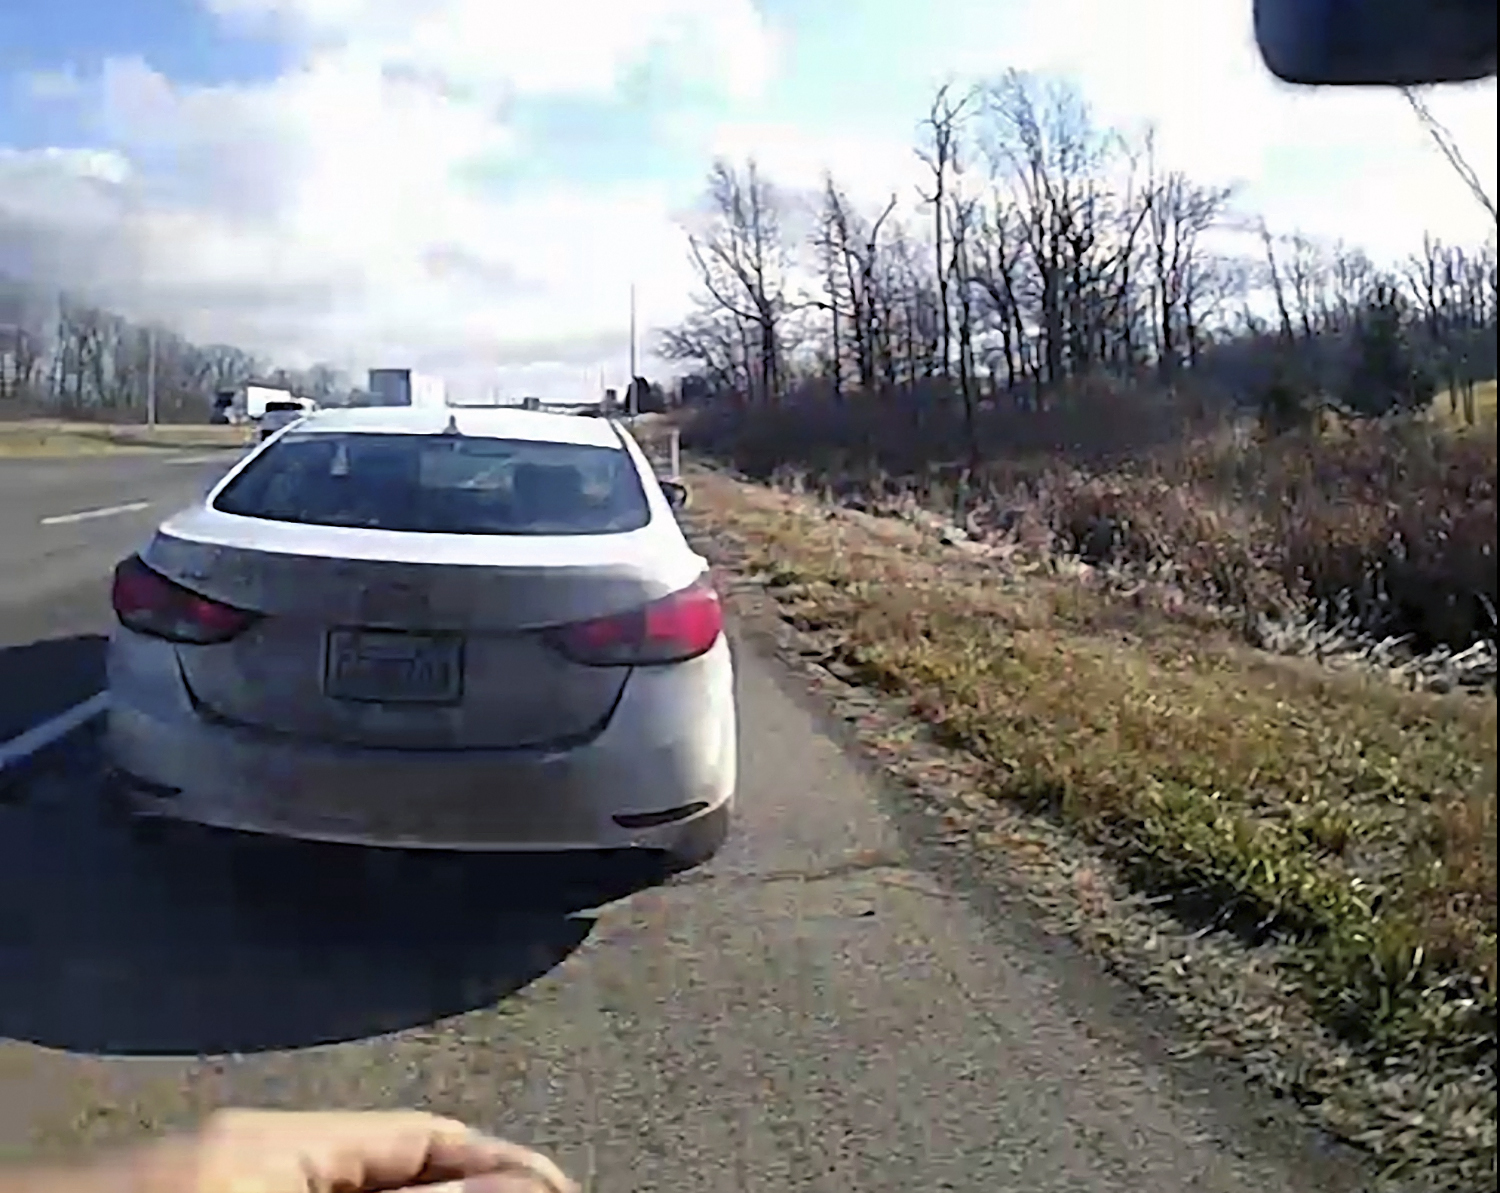 In this image from a bodycam video provided by the Hancock County Sheriff's Office, a white Hyundai Elantra occupied by Bryan Kohberger and his father is seen on a deputy’s body camera video during a traffic stop on Thursday, Dec. 15, 2022, in Hancock County, Ind. Bryan Kohberger, accused in the November slayings of four University of Idaho students, had a first court appearance on Jan. 5, 2023 in Latah County Court in Moscow, Idaho on first-degree murder charges. (Hancock County Sheriff's Office via AP)